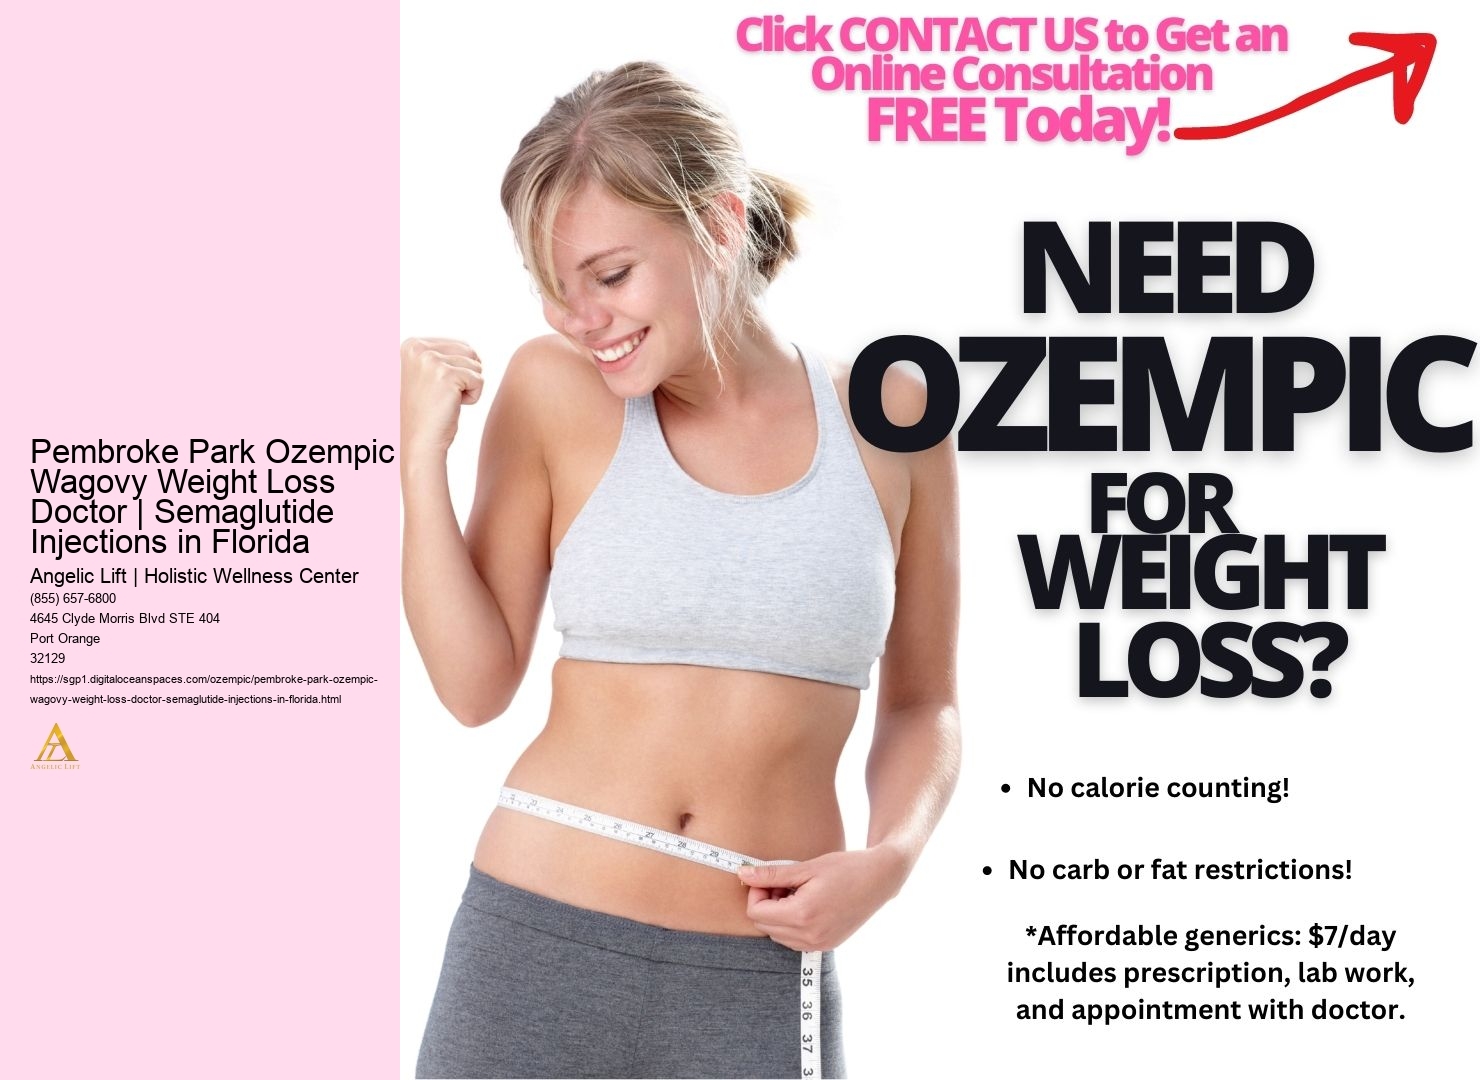 Pembroke Park Ozempic & Wagovy Weight Loss Doctor | Semaglutide Injections in Florida